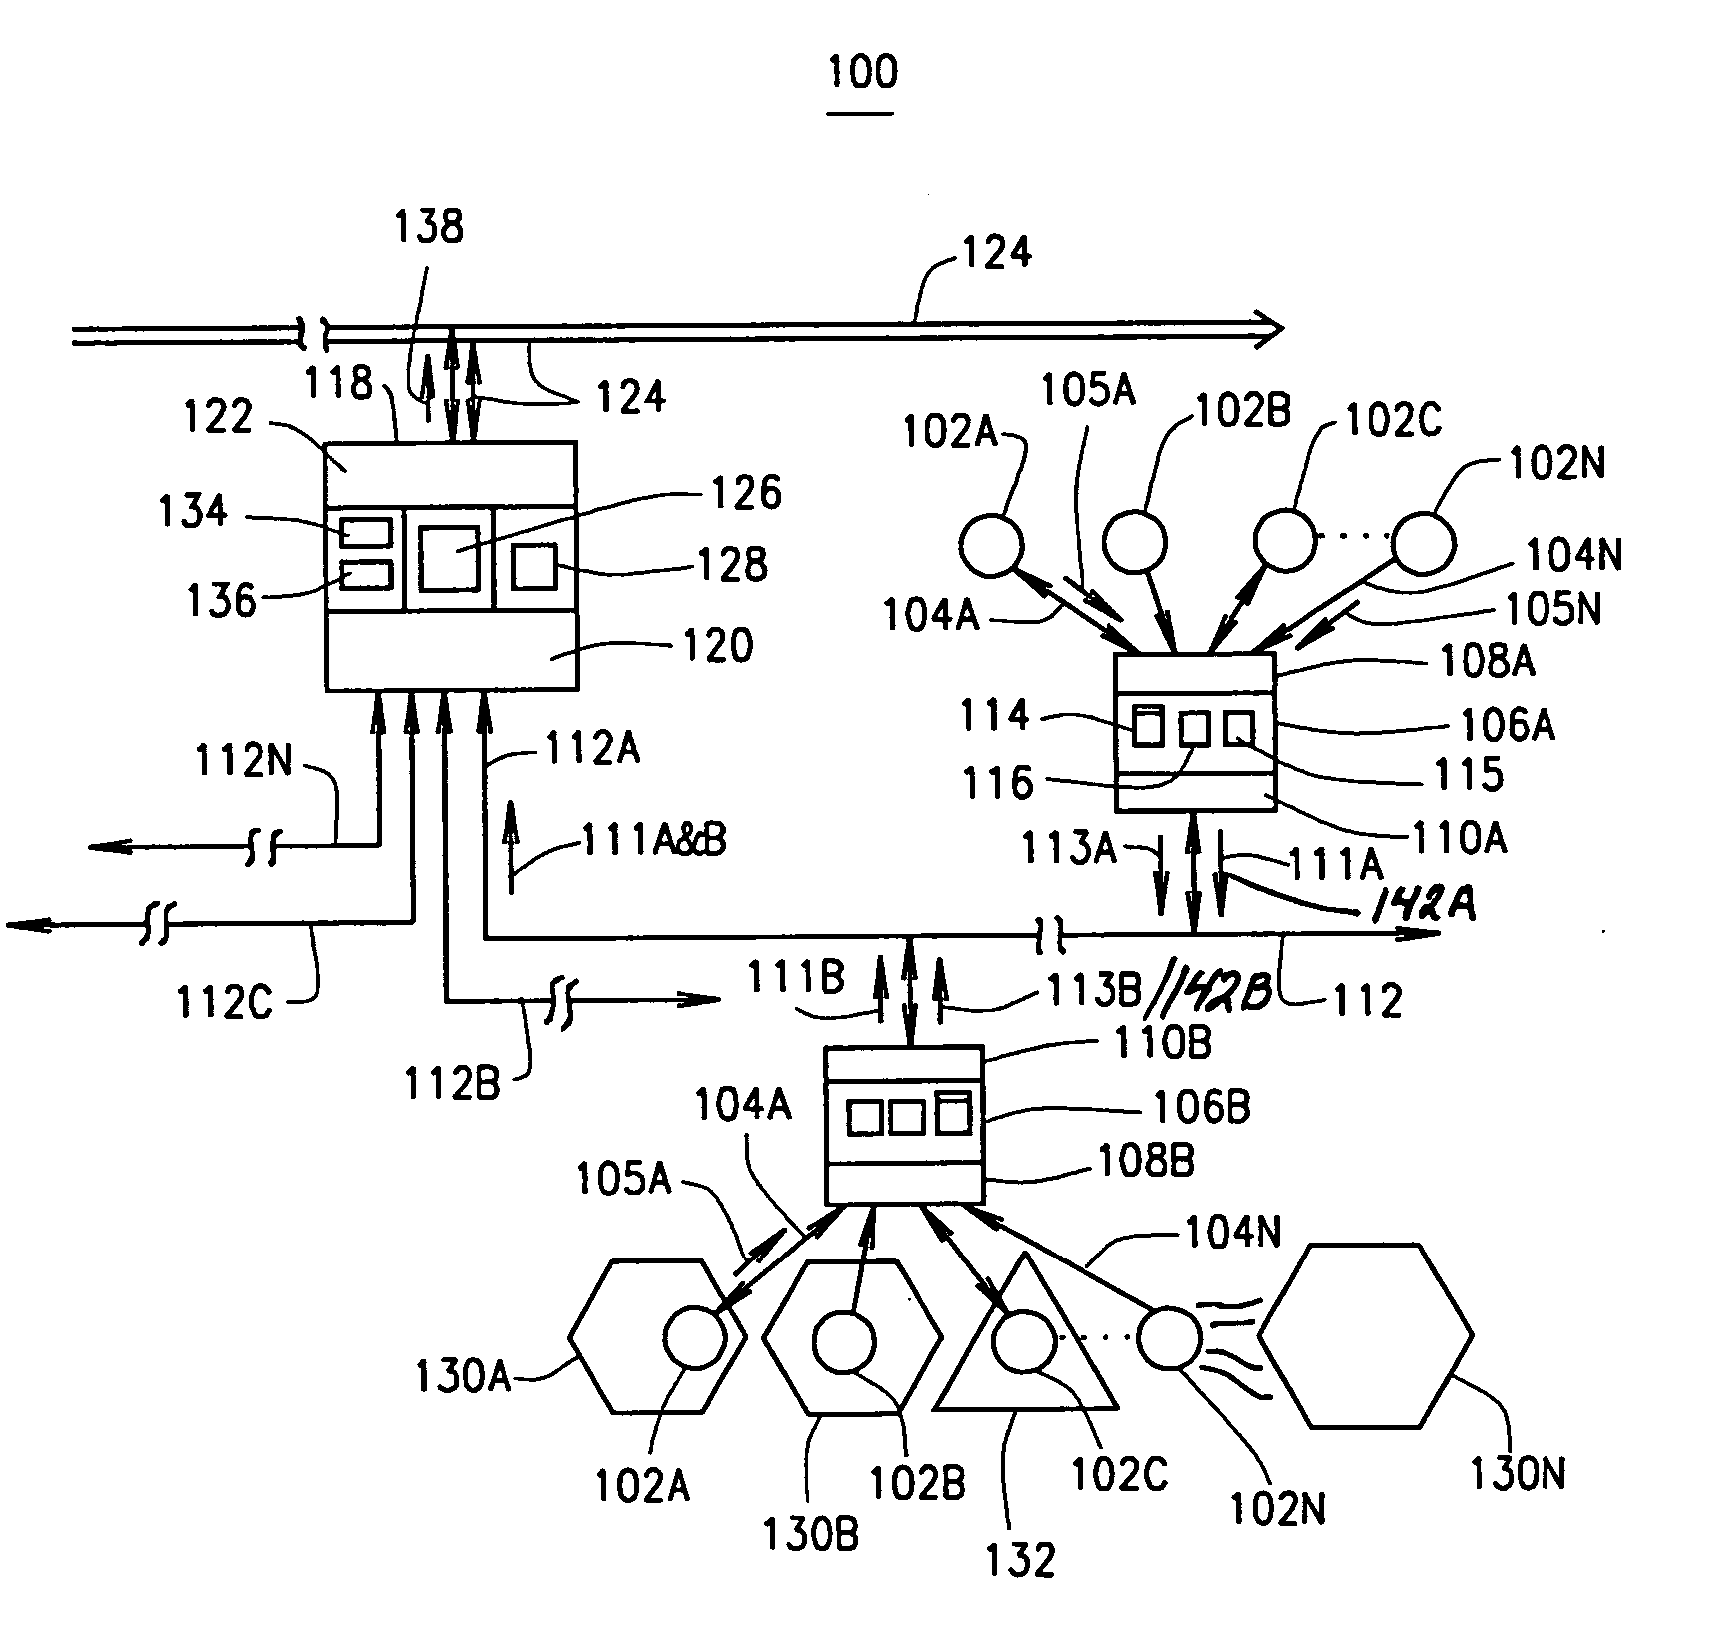 Distributed diagnostic operations system